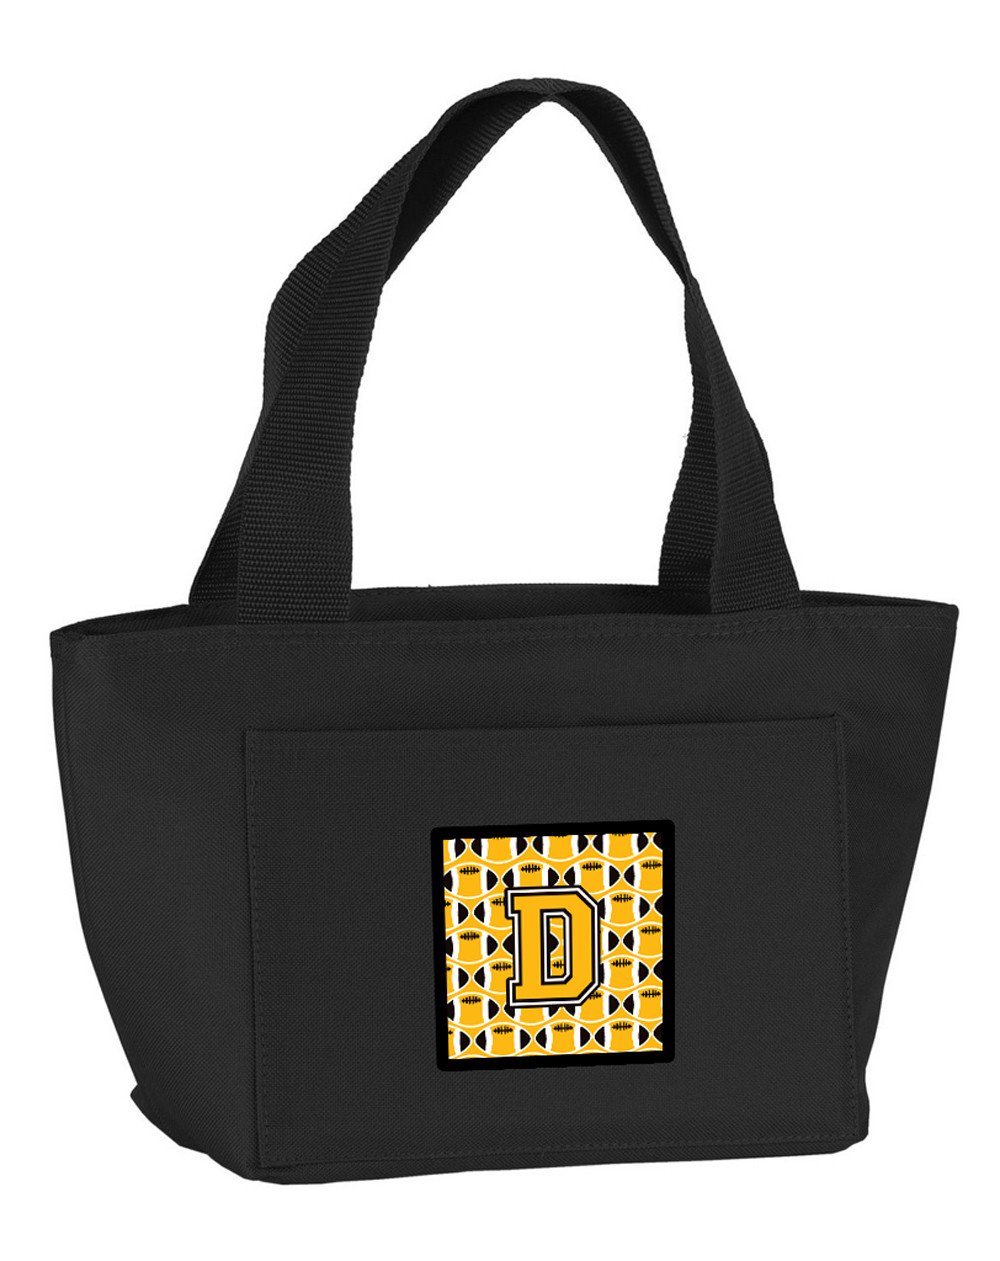 Letter D Football Black, Old Gold and White Lunch Bag CJ1080-DBK-8808 by Caroline's Treasures